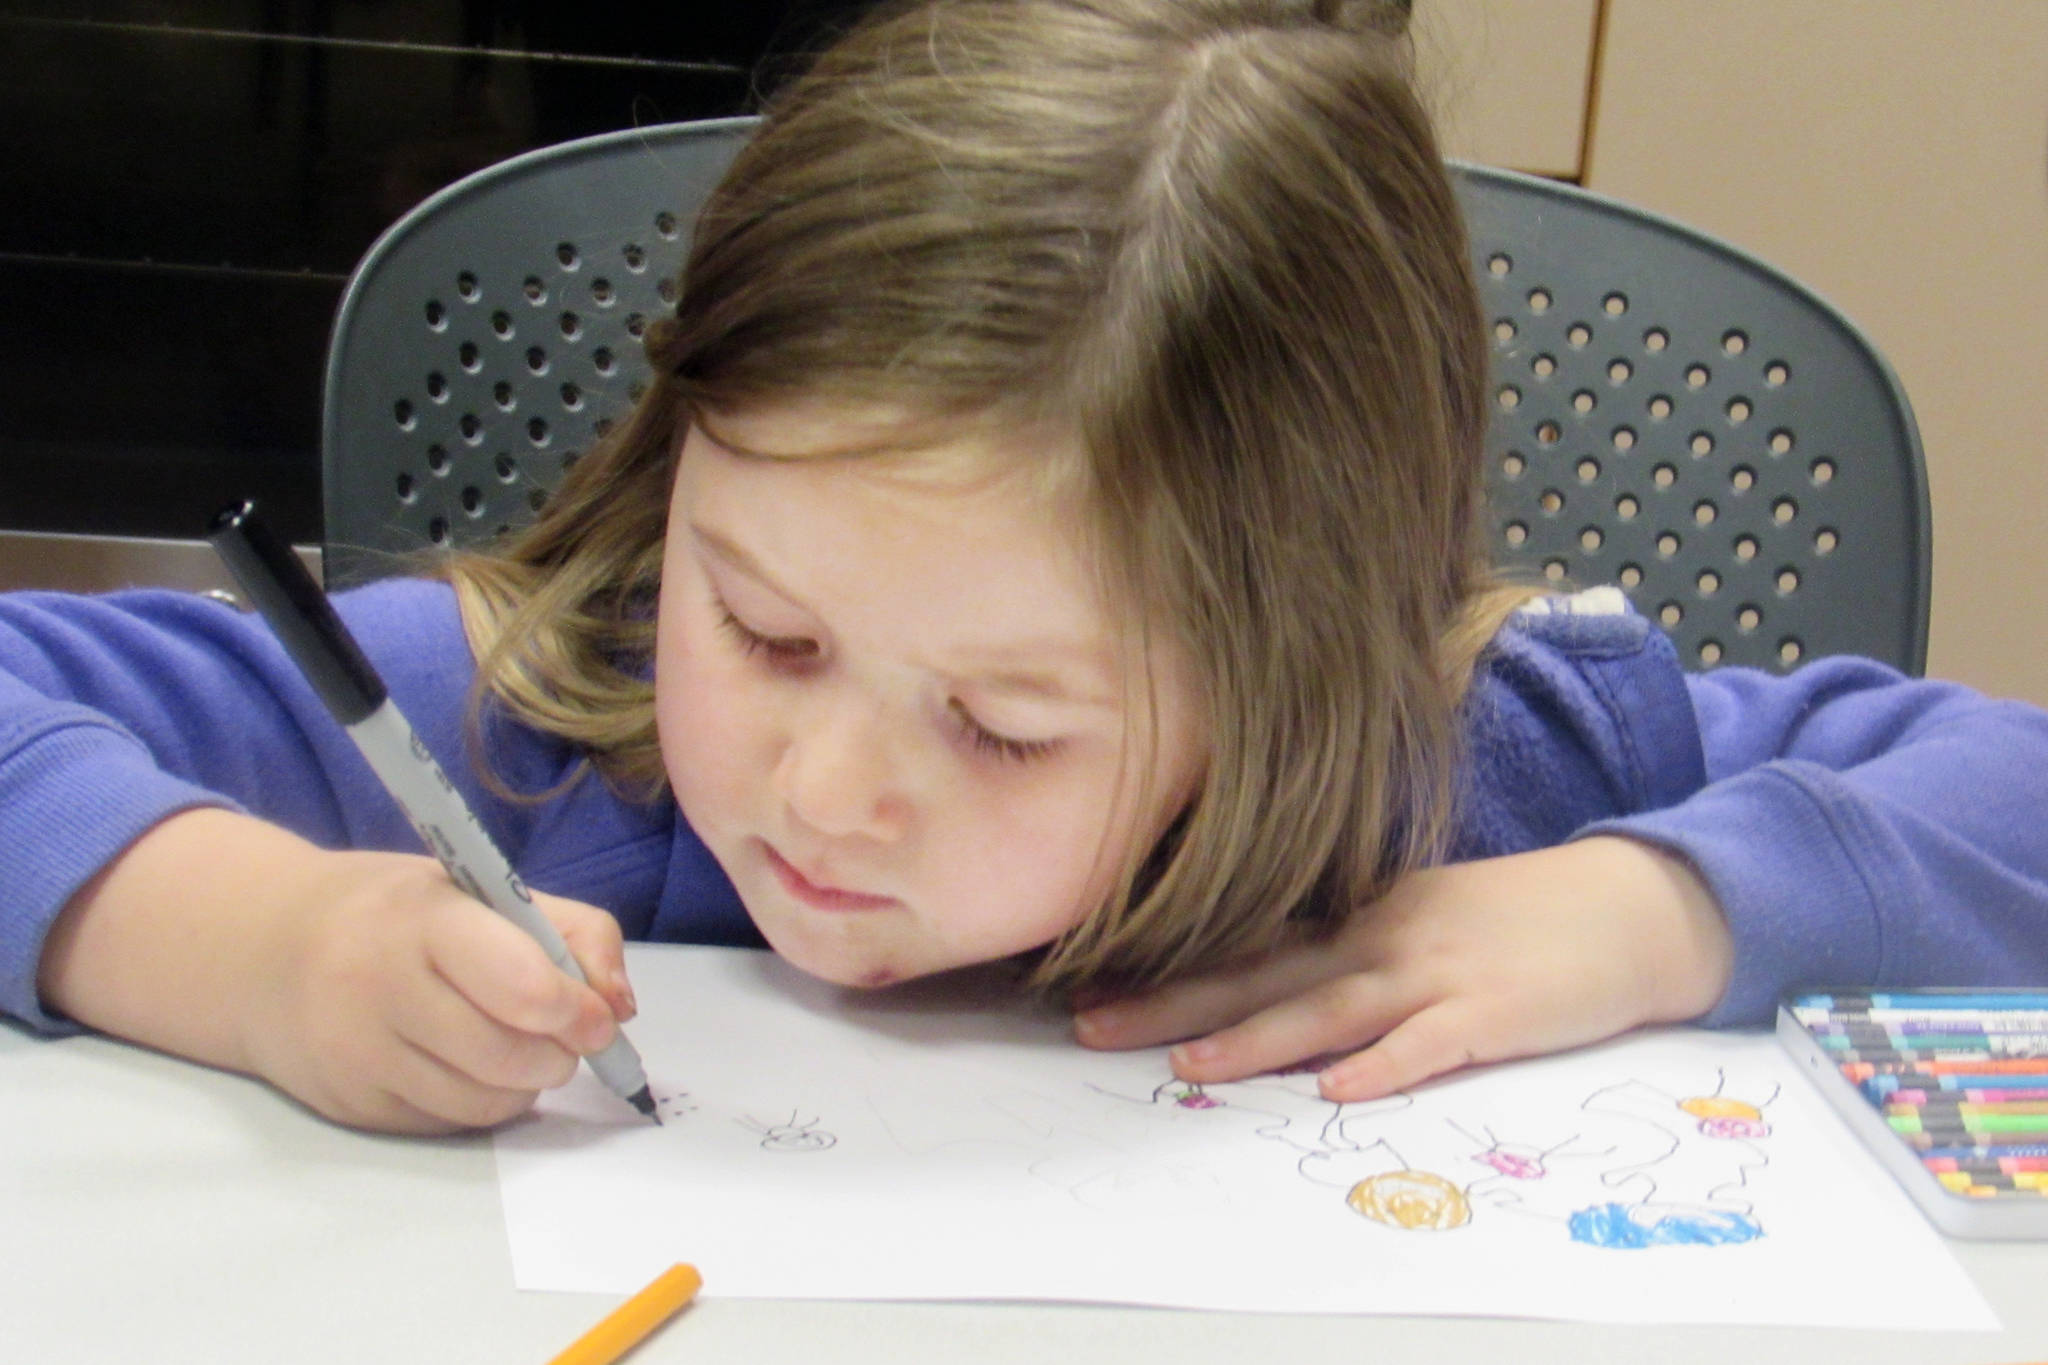 Zuriel Kerr, 4, works on coloring her monster during a How to Make a Monster workshop with artist Glo Rameriz Saturday afternoon at Douglas Public Library.(Ben Hohenstatt | Capital City Weekly)